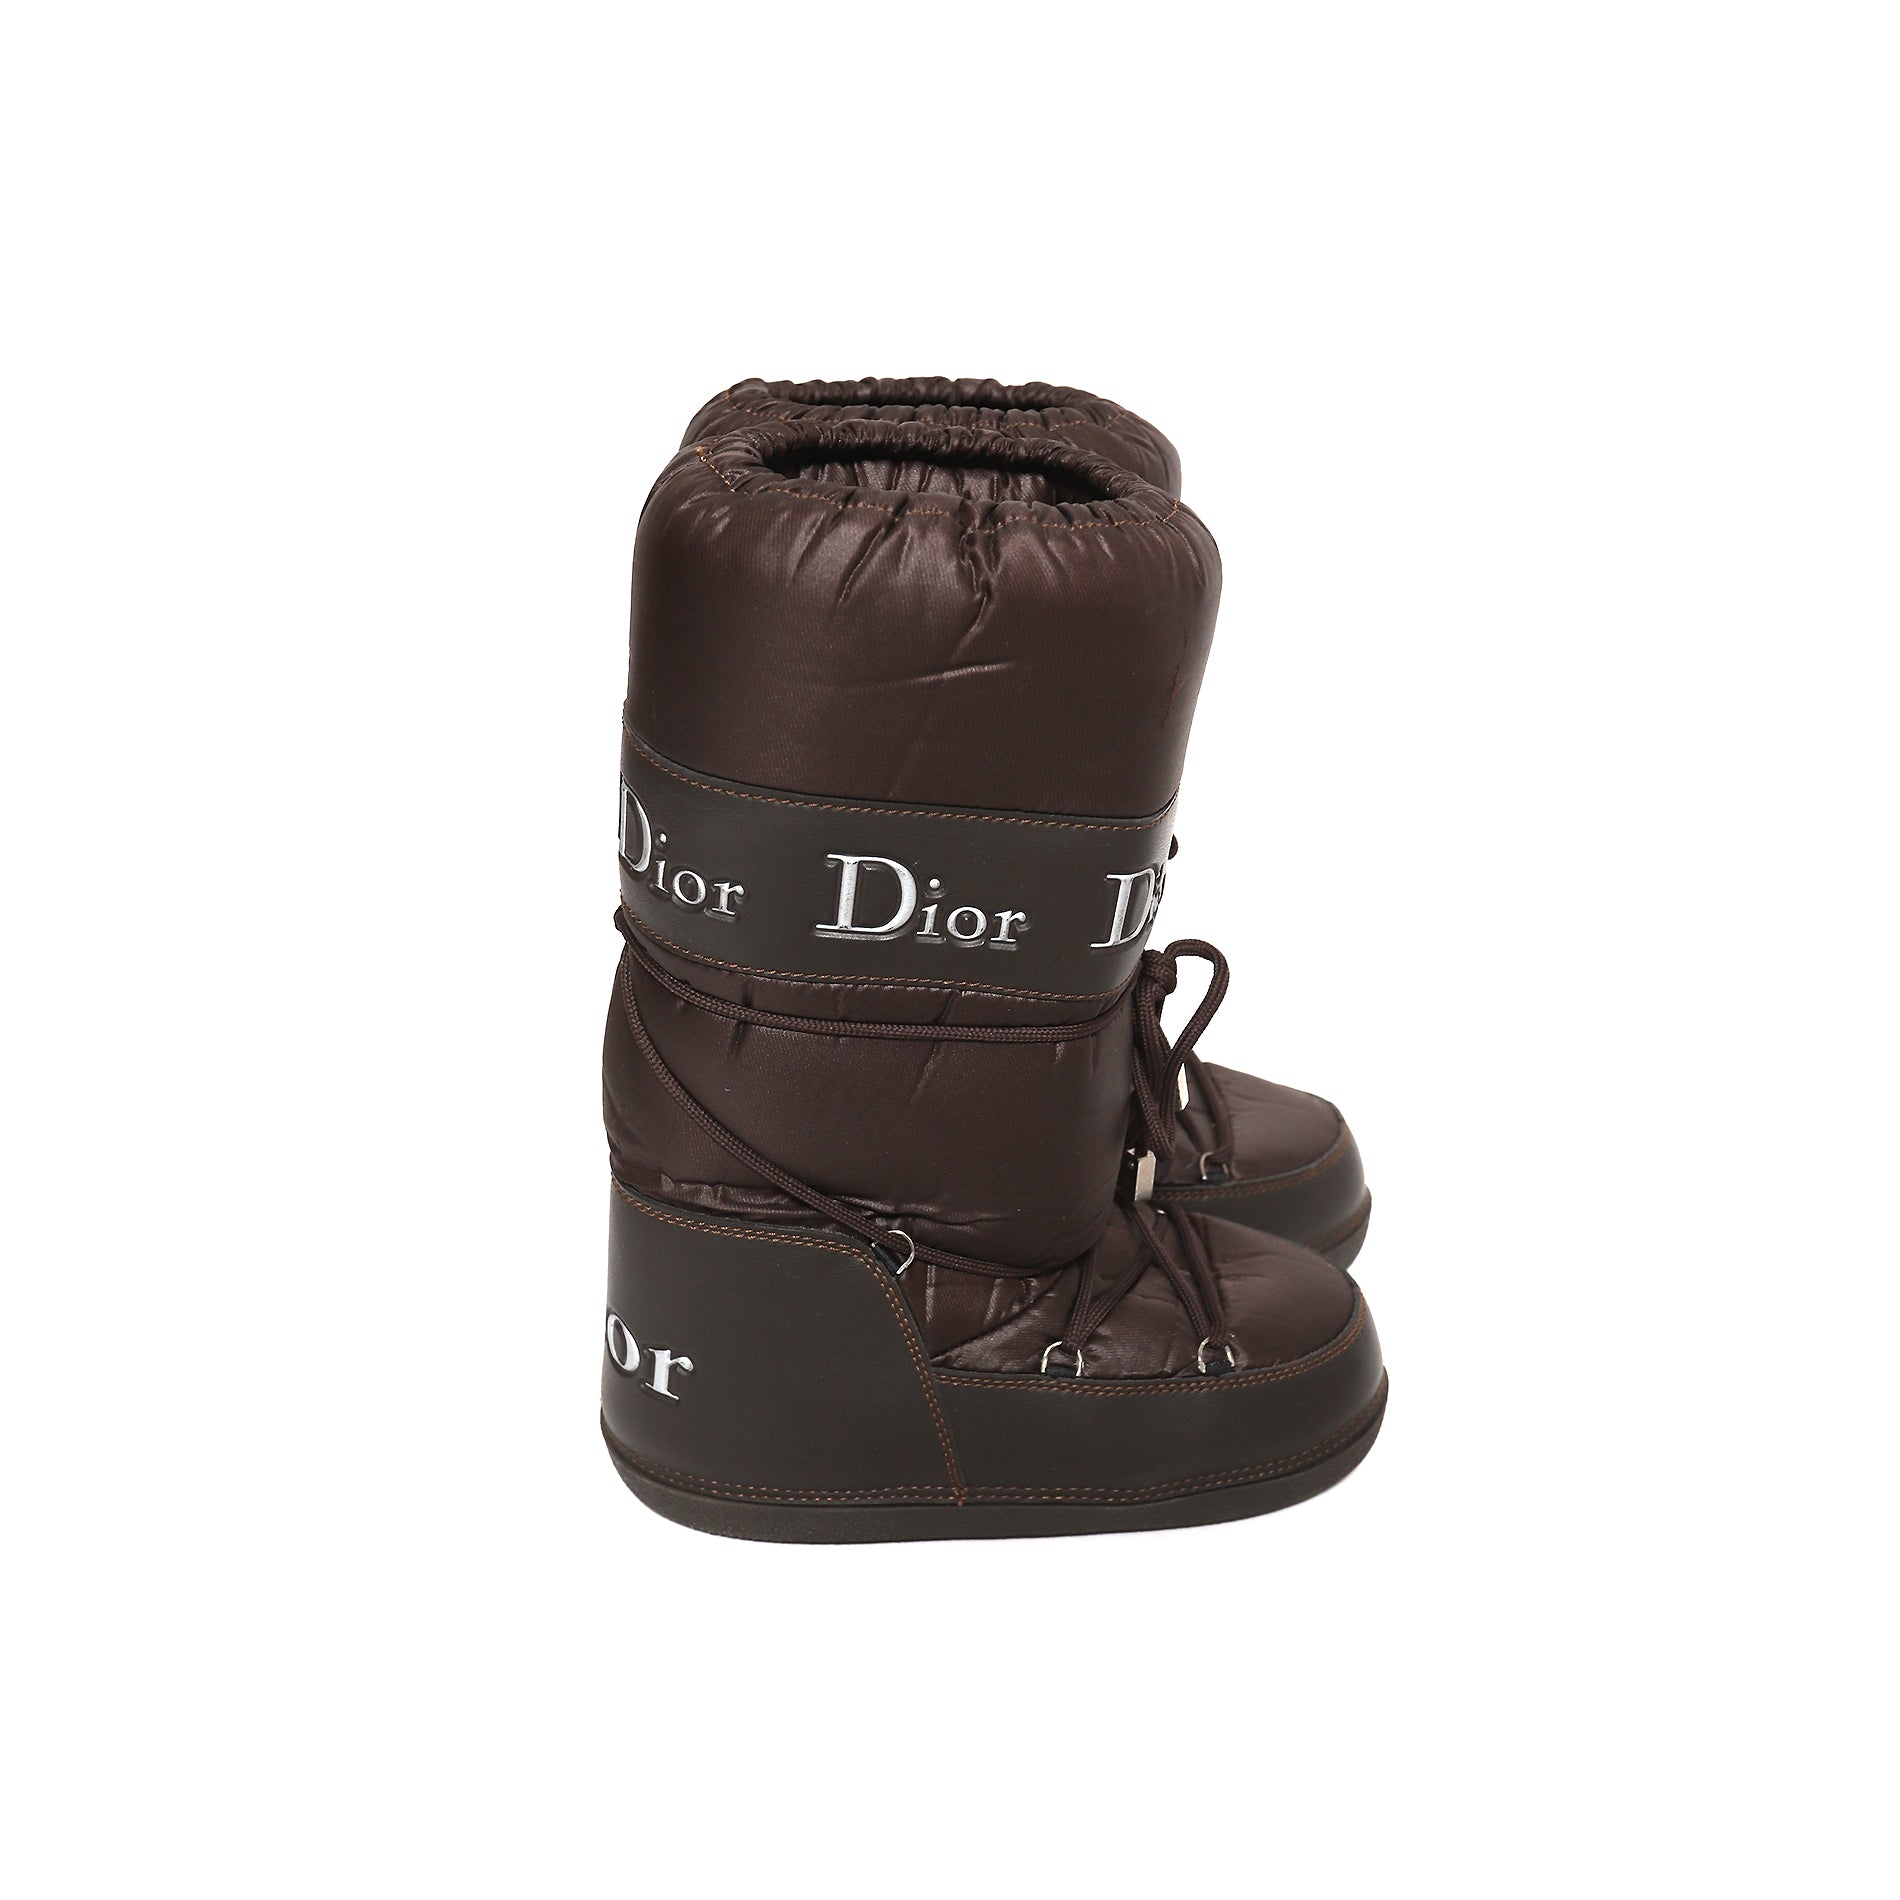 Dior, Shoes, Christian Dior Winter Boots